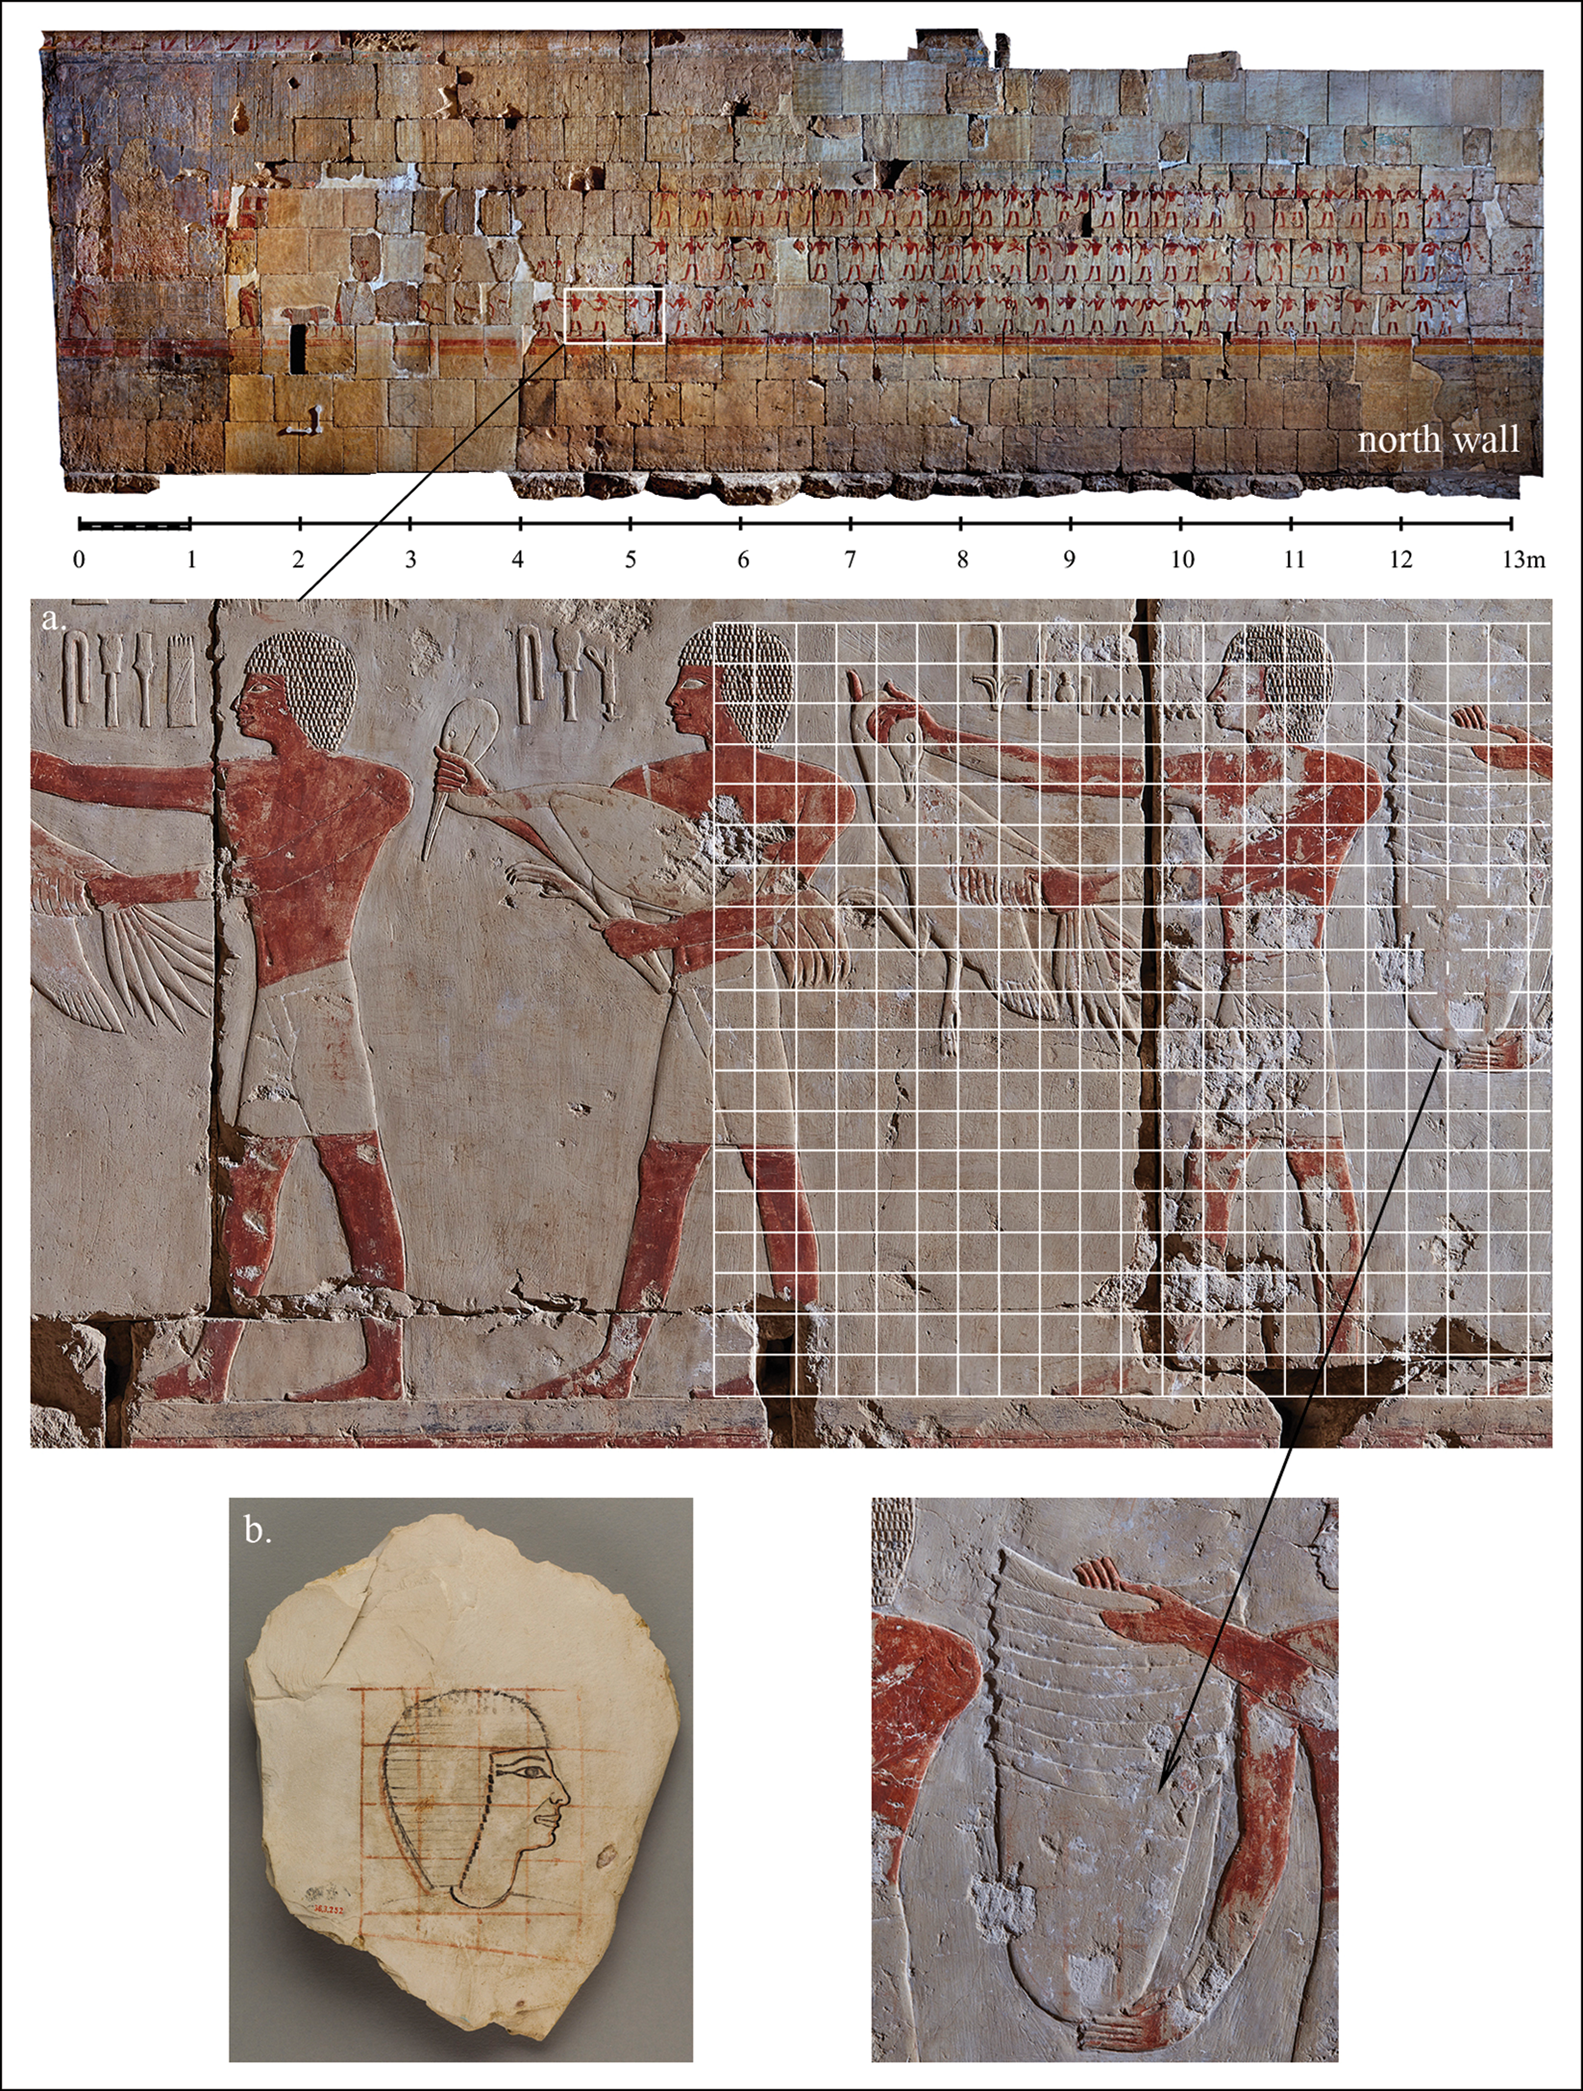 a - reconstruction of the auxiliary grid, traces of which were found on the north wall of the Hatshepsut chapel; b - an example of a sample image on a limestone ostracon (portrait of Senenmut, head of the construction of the Chapel of Hatshepsut). Credit: Anastasiia Stupko-Lubczynska / Antiquity, 2021